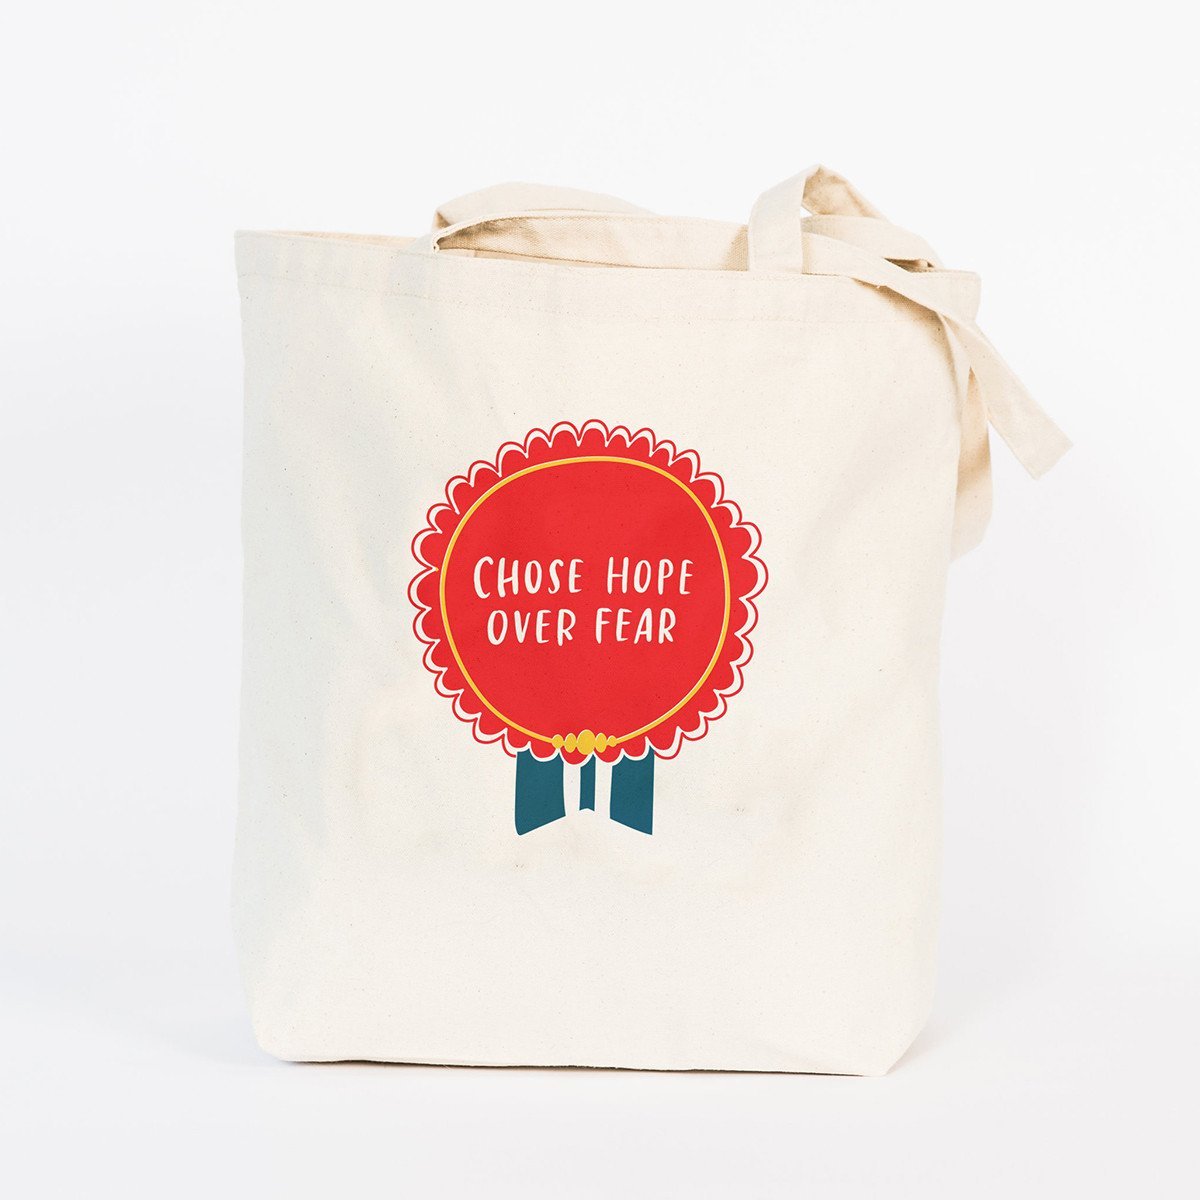 Chose Hope Over Fear Everyday Bravery Tote Bag